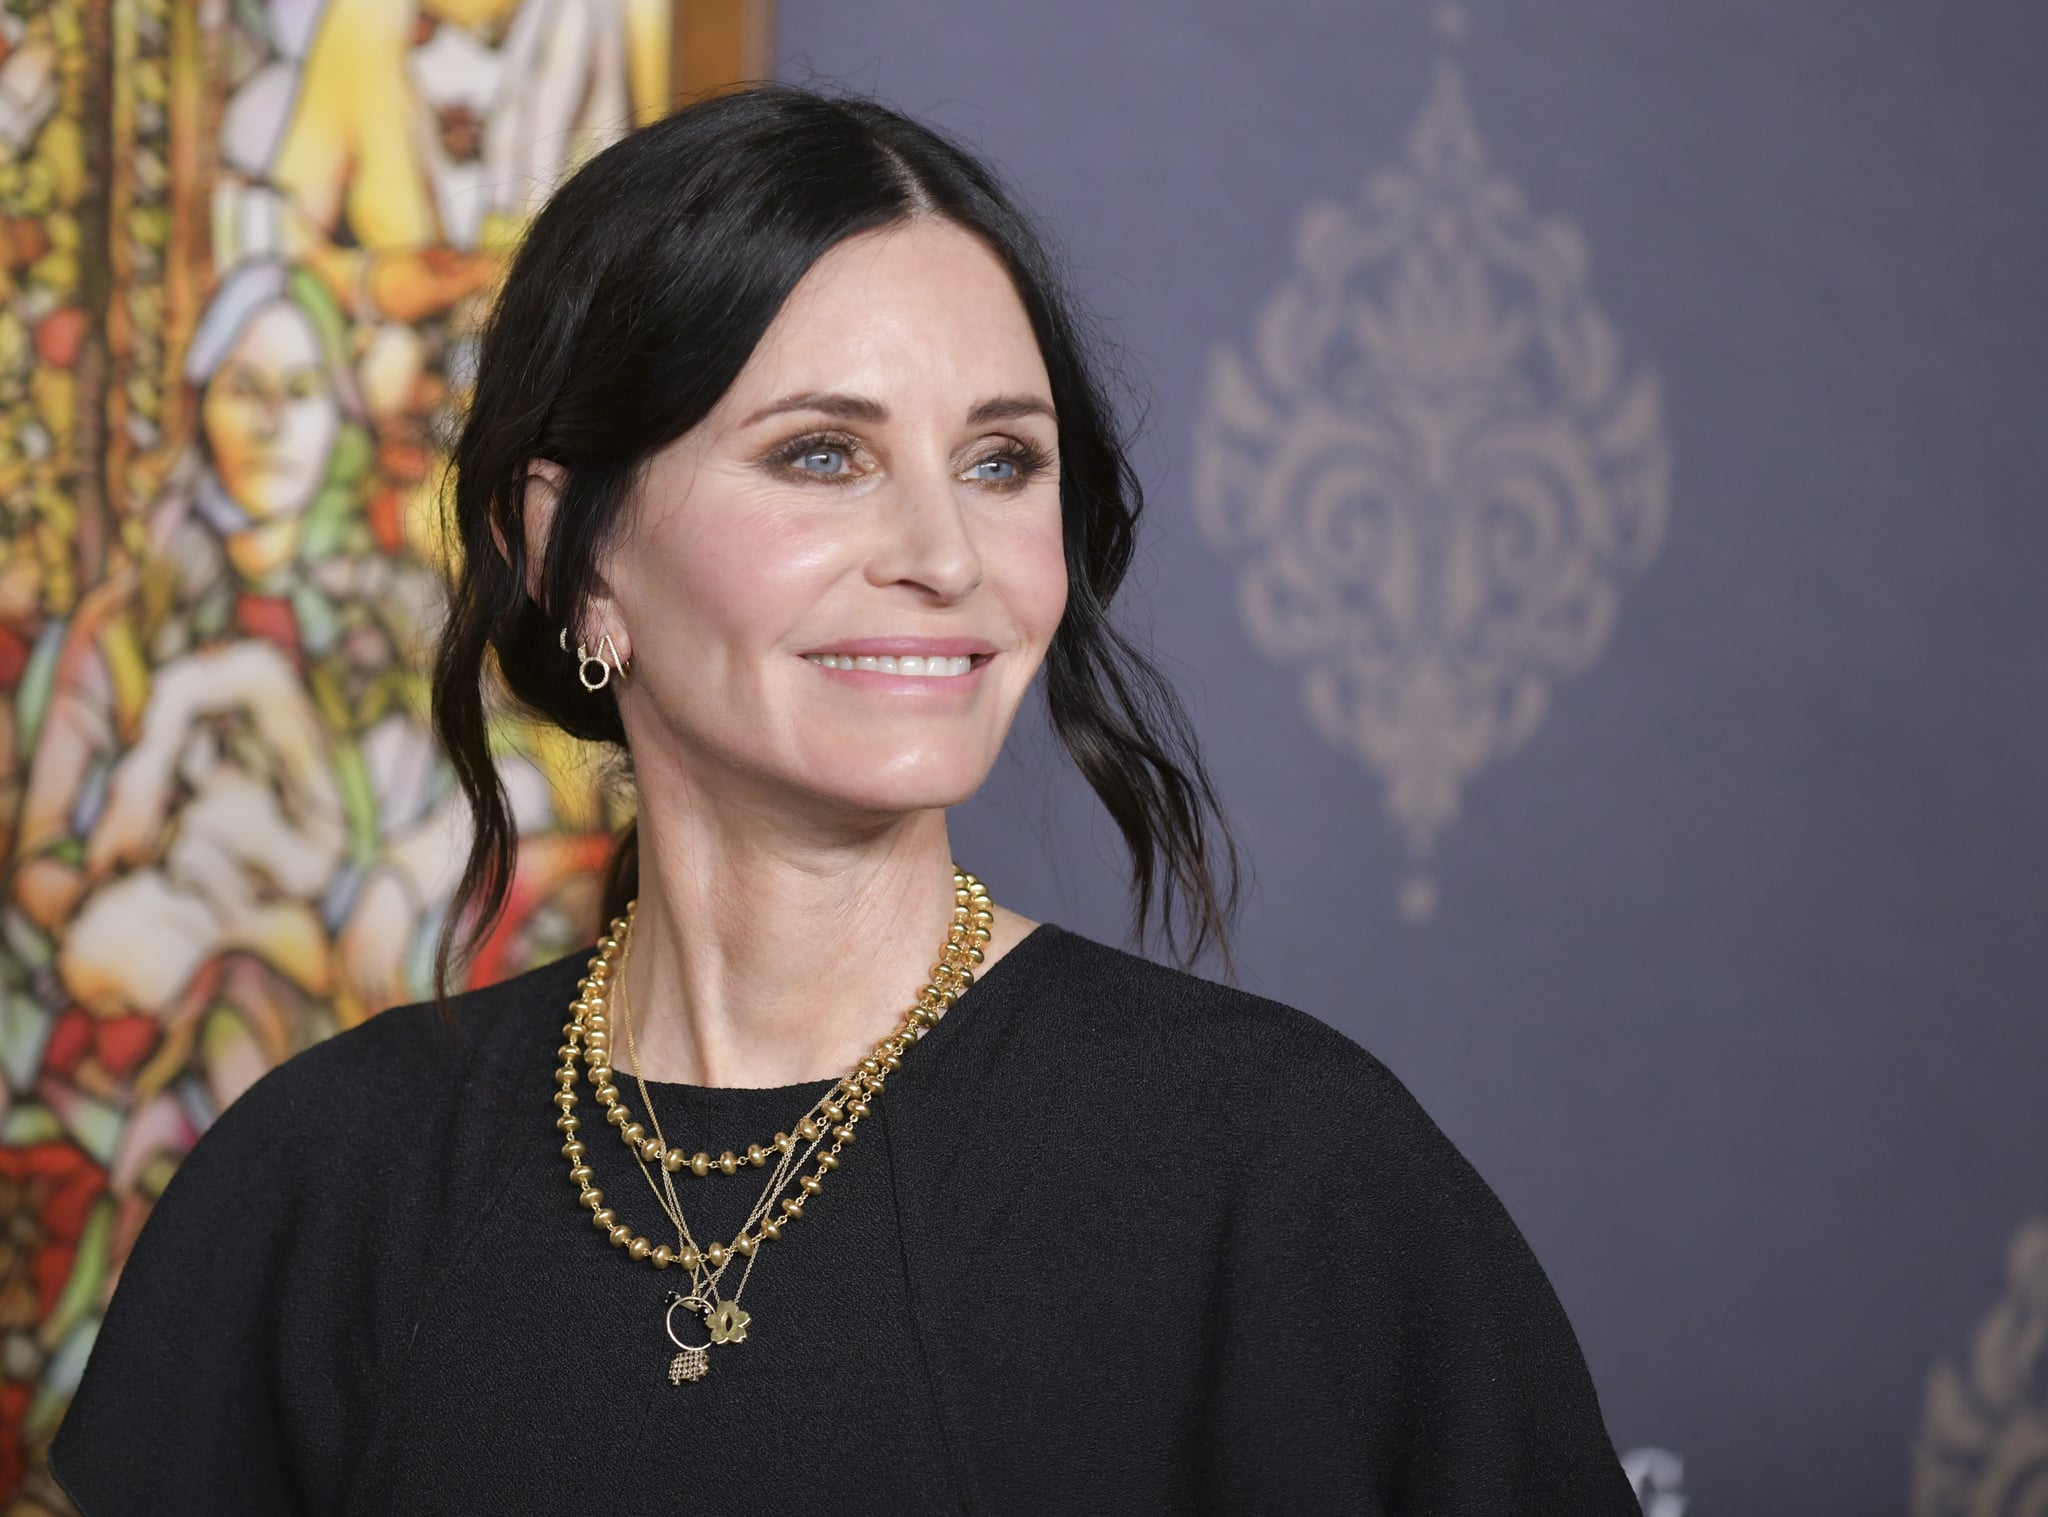 HOLLYWOOD, CALIFORNIA - FEBRUARY 28: Courteney Cox attends the premiere of STARZ 